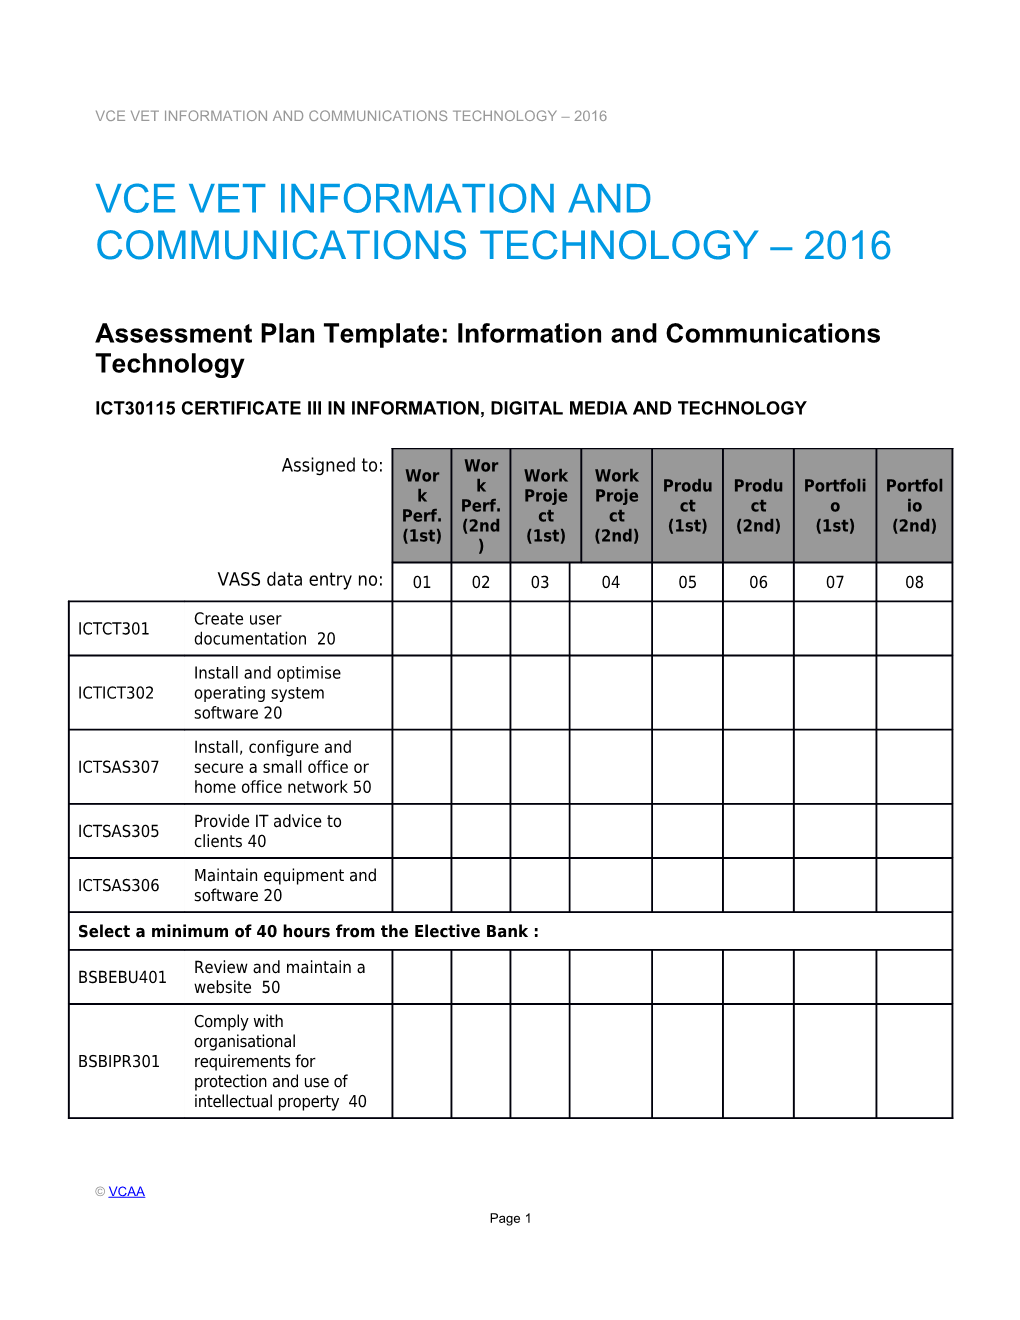 VCE VET Information and Communications Technology - Assessment Plan - Template and Sample